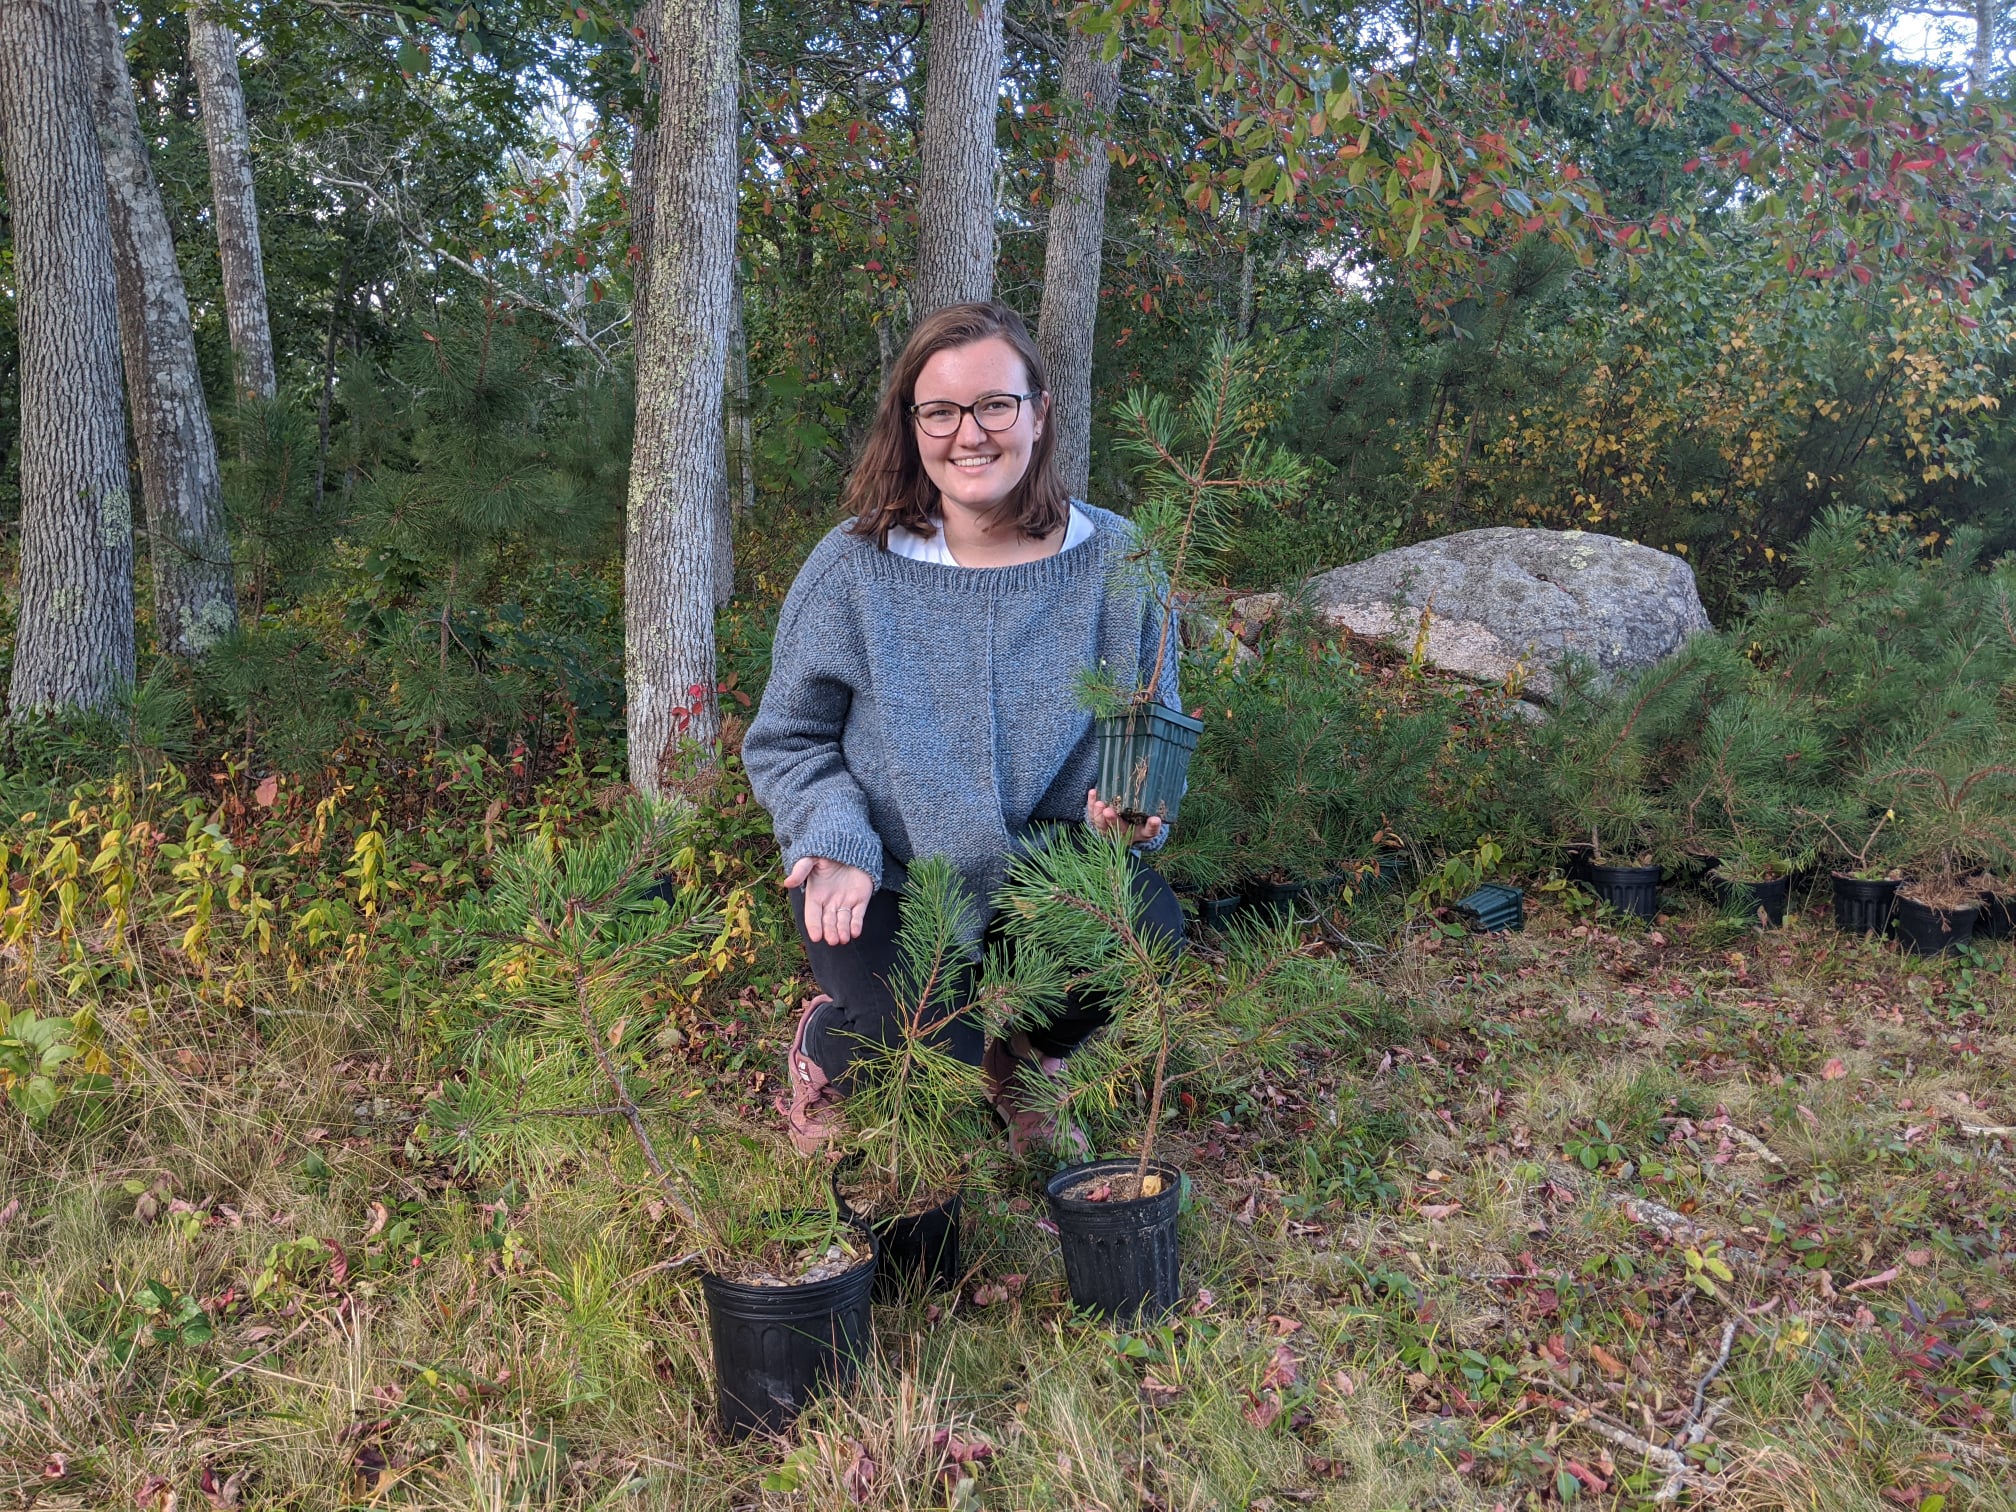 Anna posing with some of our pitch pine seedlings to publicize the "Adopt a Pitch Pine" event